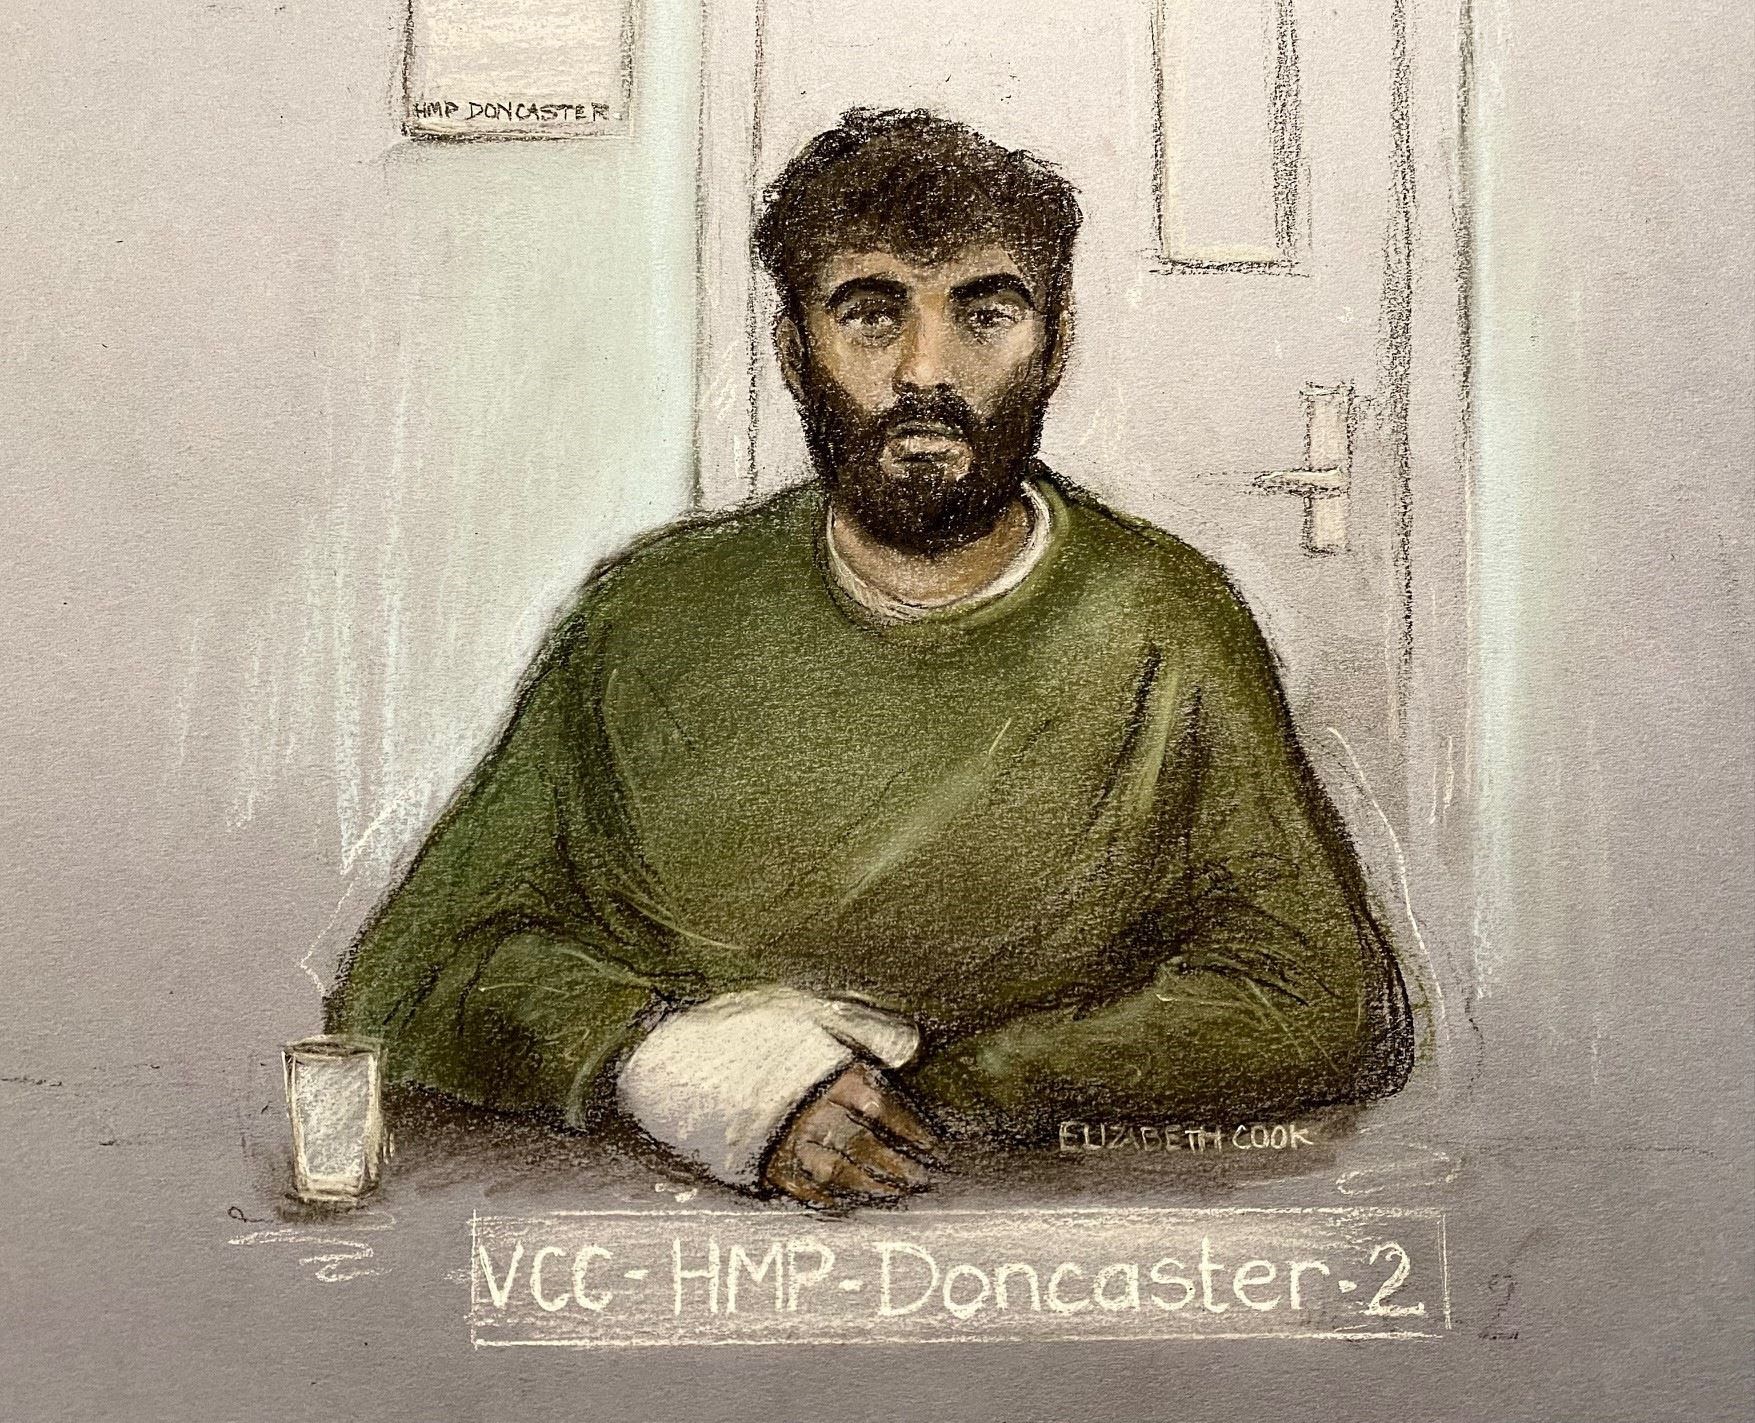 Hassan Jhangur was remanded in custody after Friday’s hearing (Elizabeth Cook/PA)